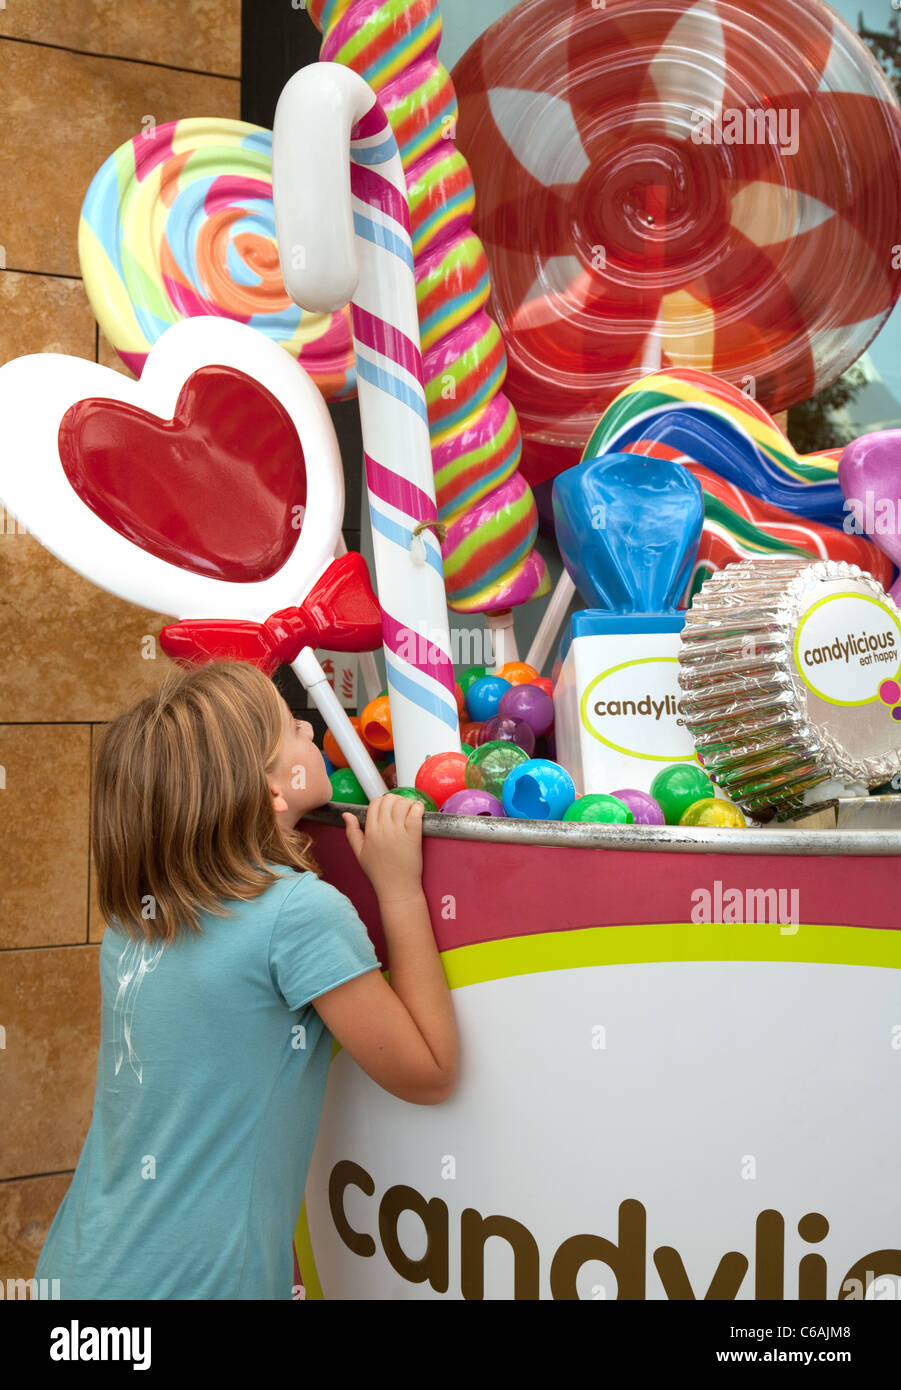 A young girl looking at sweets; the Candylicious store, Sentosa Island Singapore Stock Photo